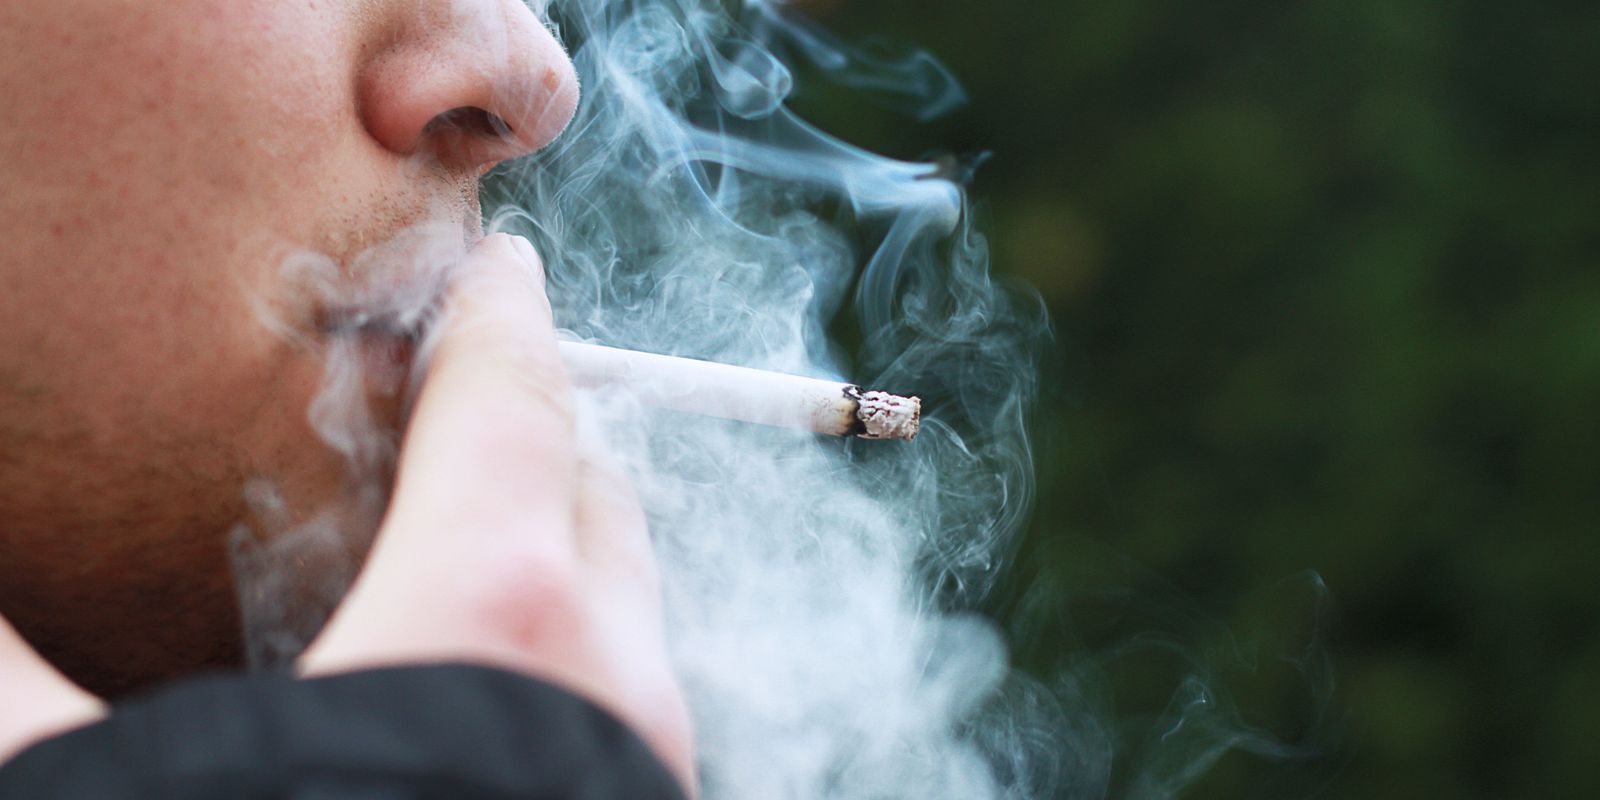 The UK will criminalize tobacco sales to people born after 2009